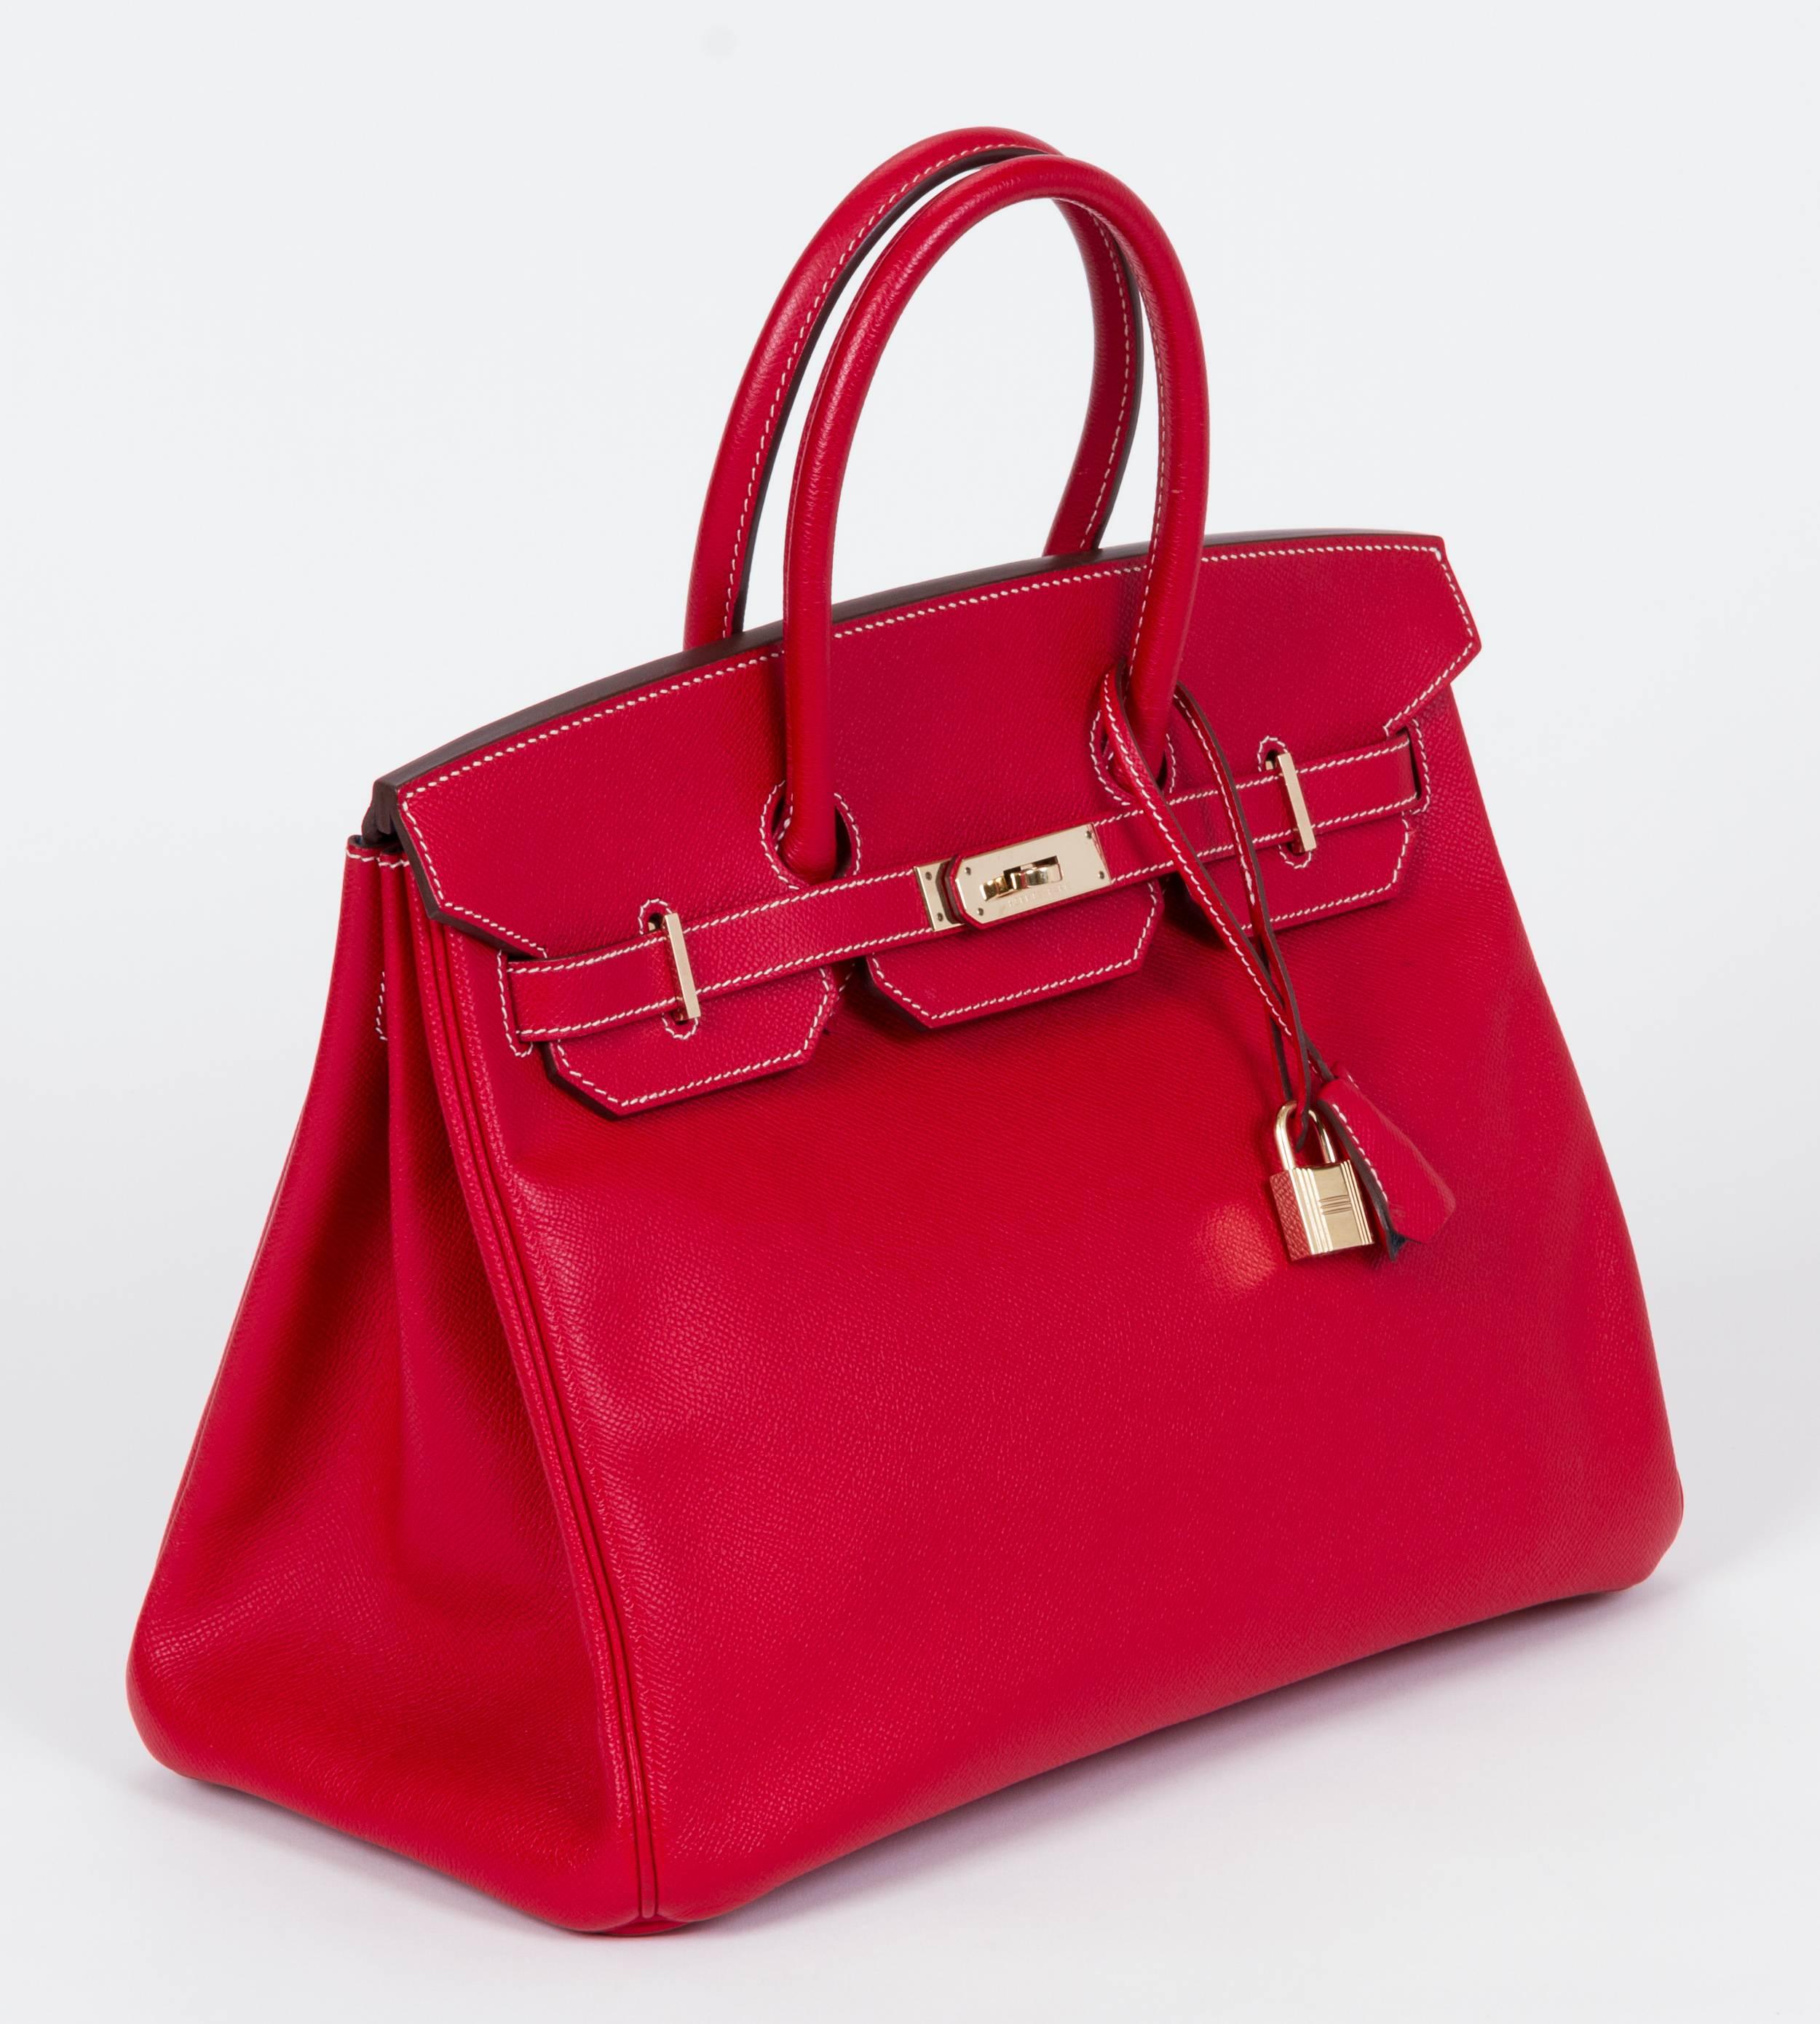 Hermes rare and collectible candy color collection Birkin bag 35 cm in rouge casaque epsom leather/talahasa blue goatskin and goldtone hardware. Date stamp P for 2012. Handle drop 4.25